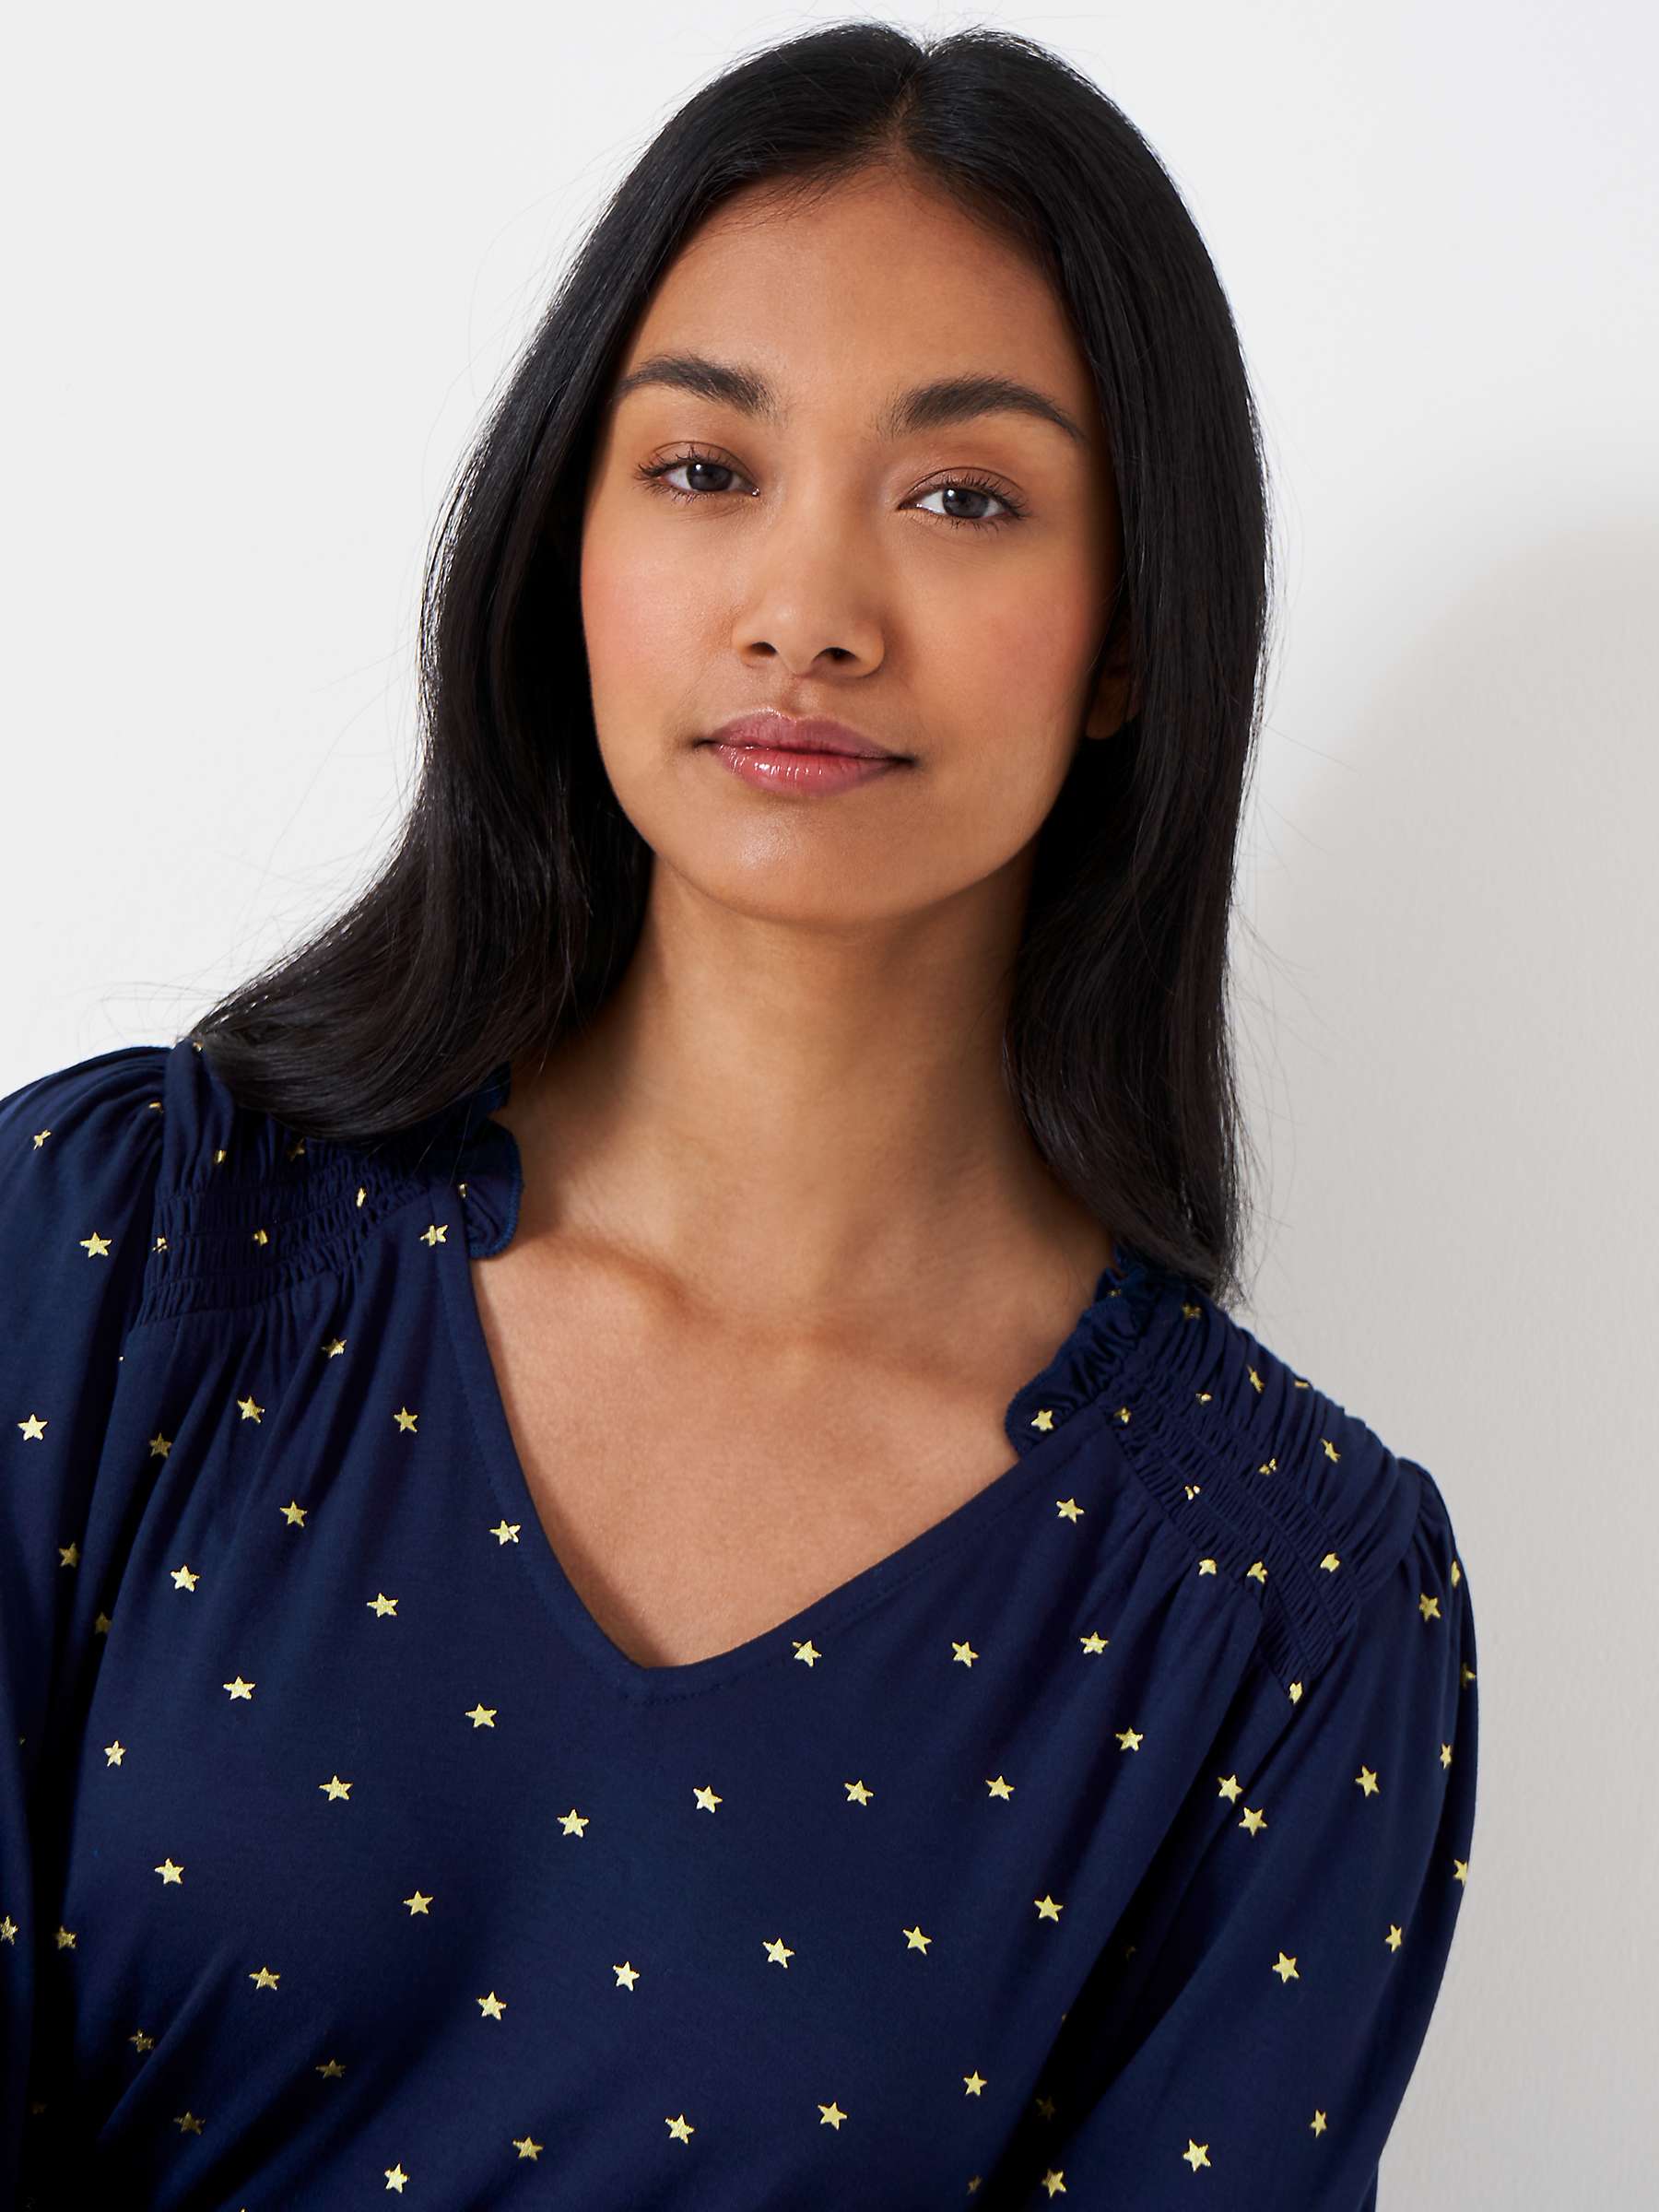 Buy Crew Clothing Shirred Foil Star Top, Navy Online at johnlewis.com